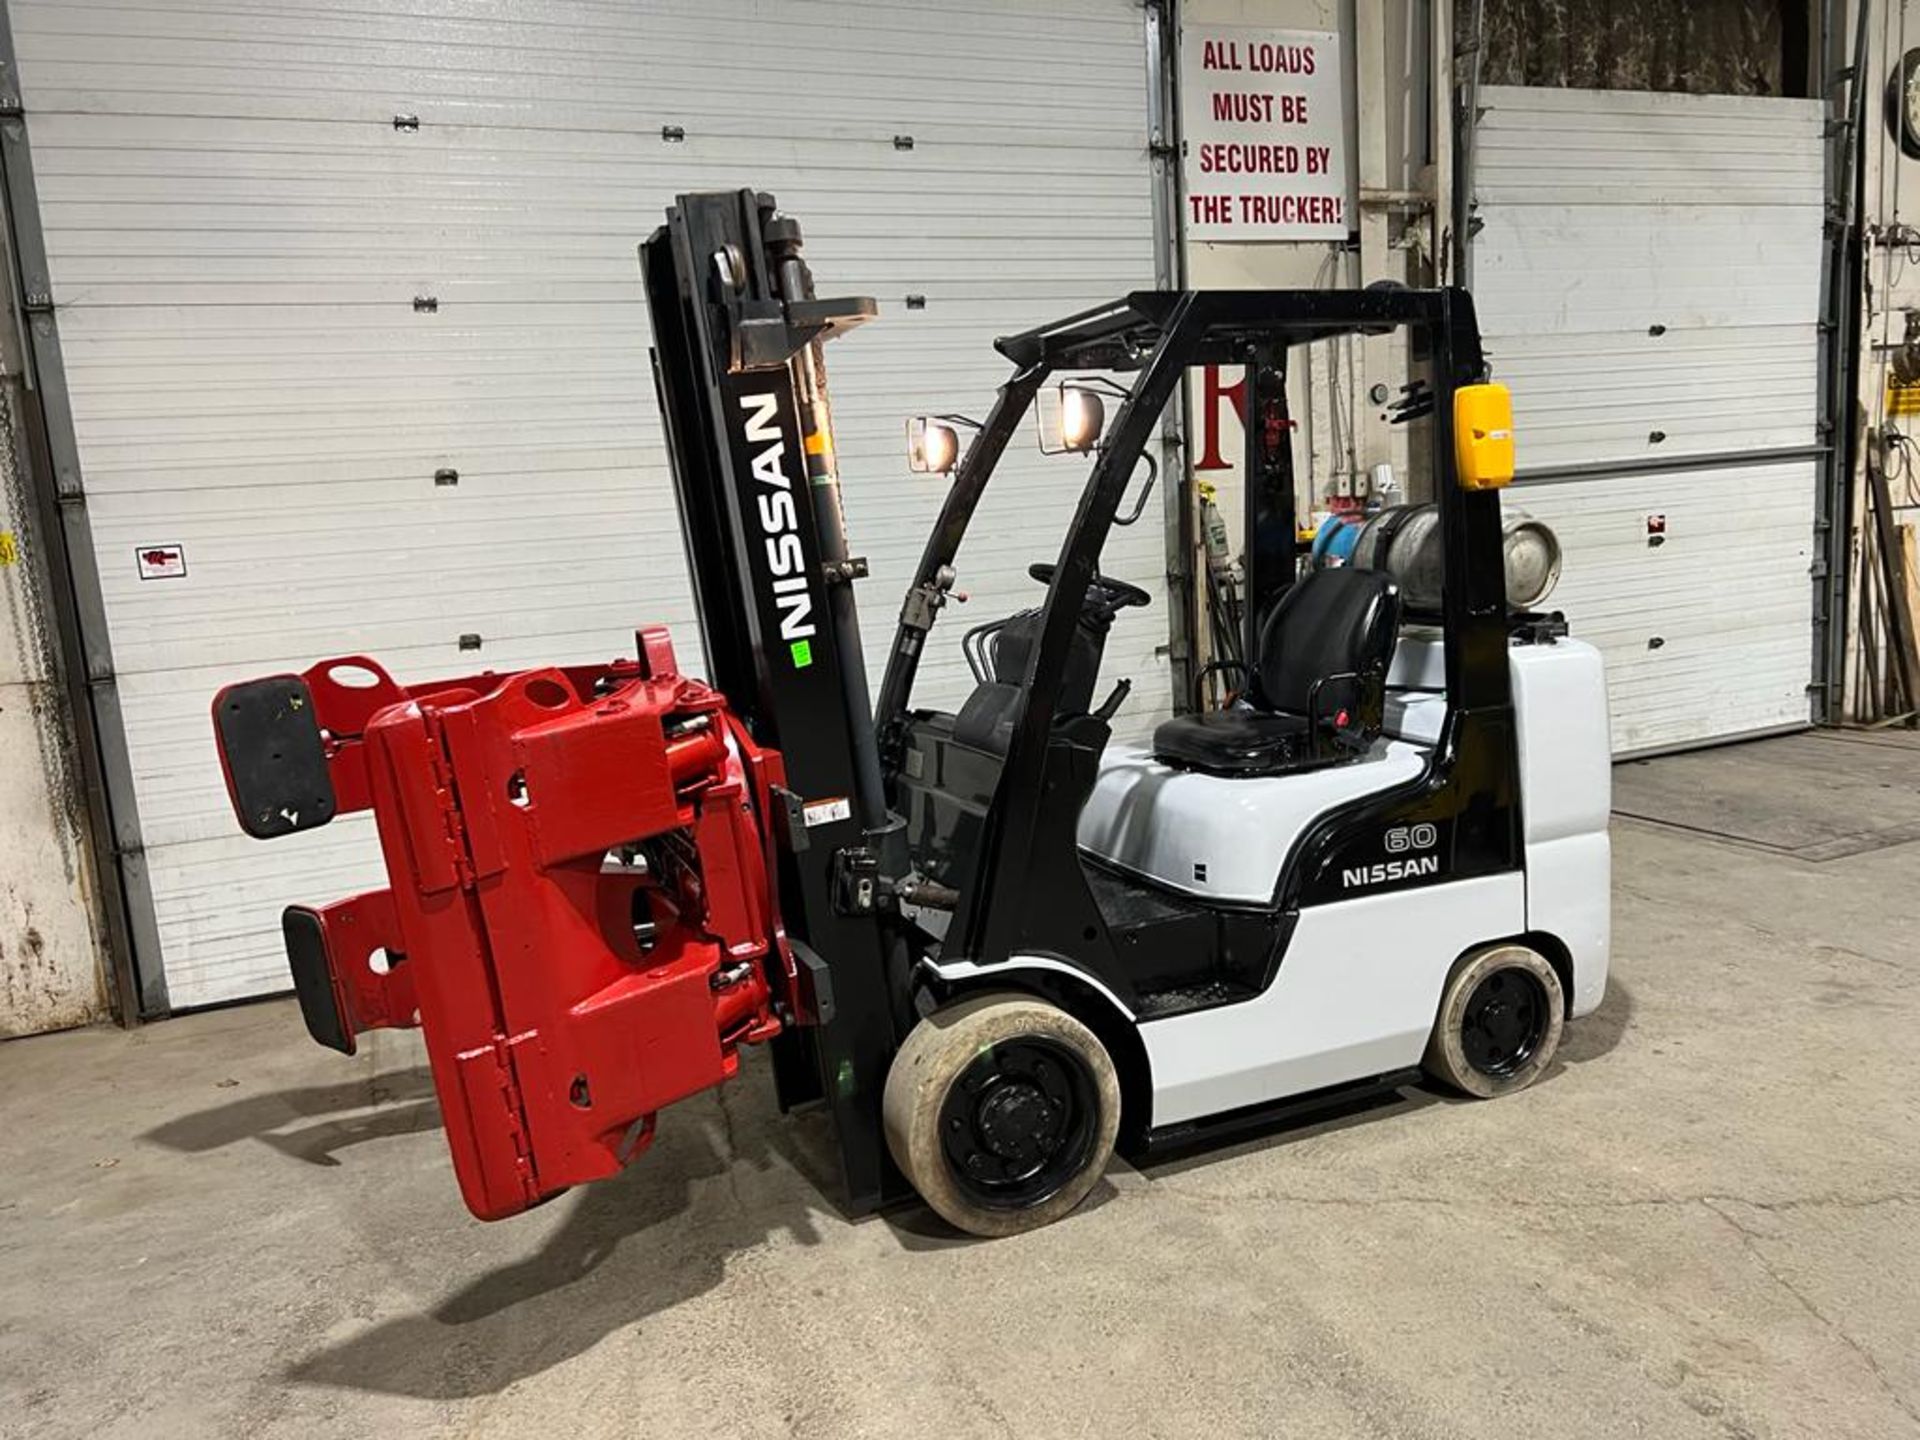 NICE Nissan 6,000lbs Capacity Forklift LPG (propane) with ROTATOR CLAMP Attachament - FREE